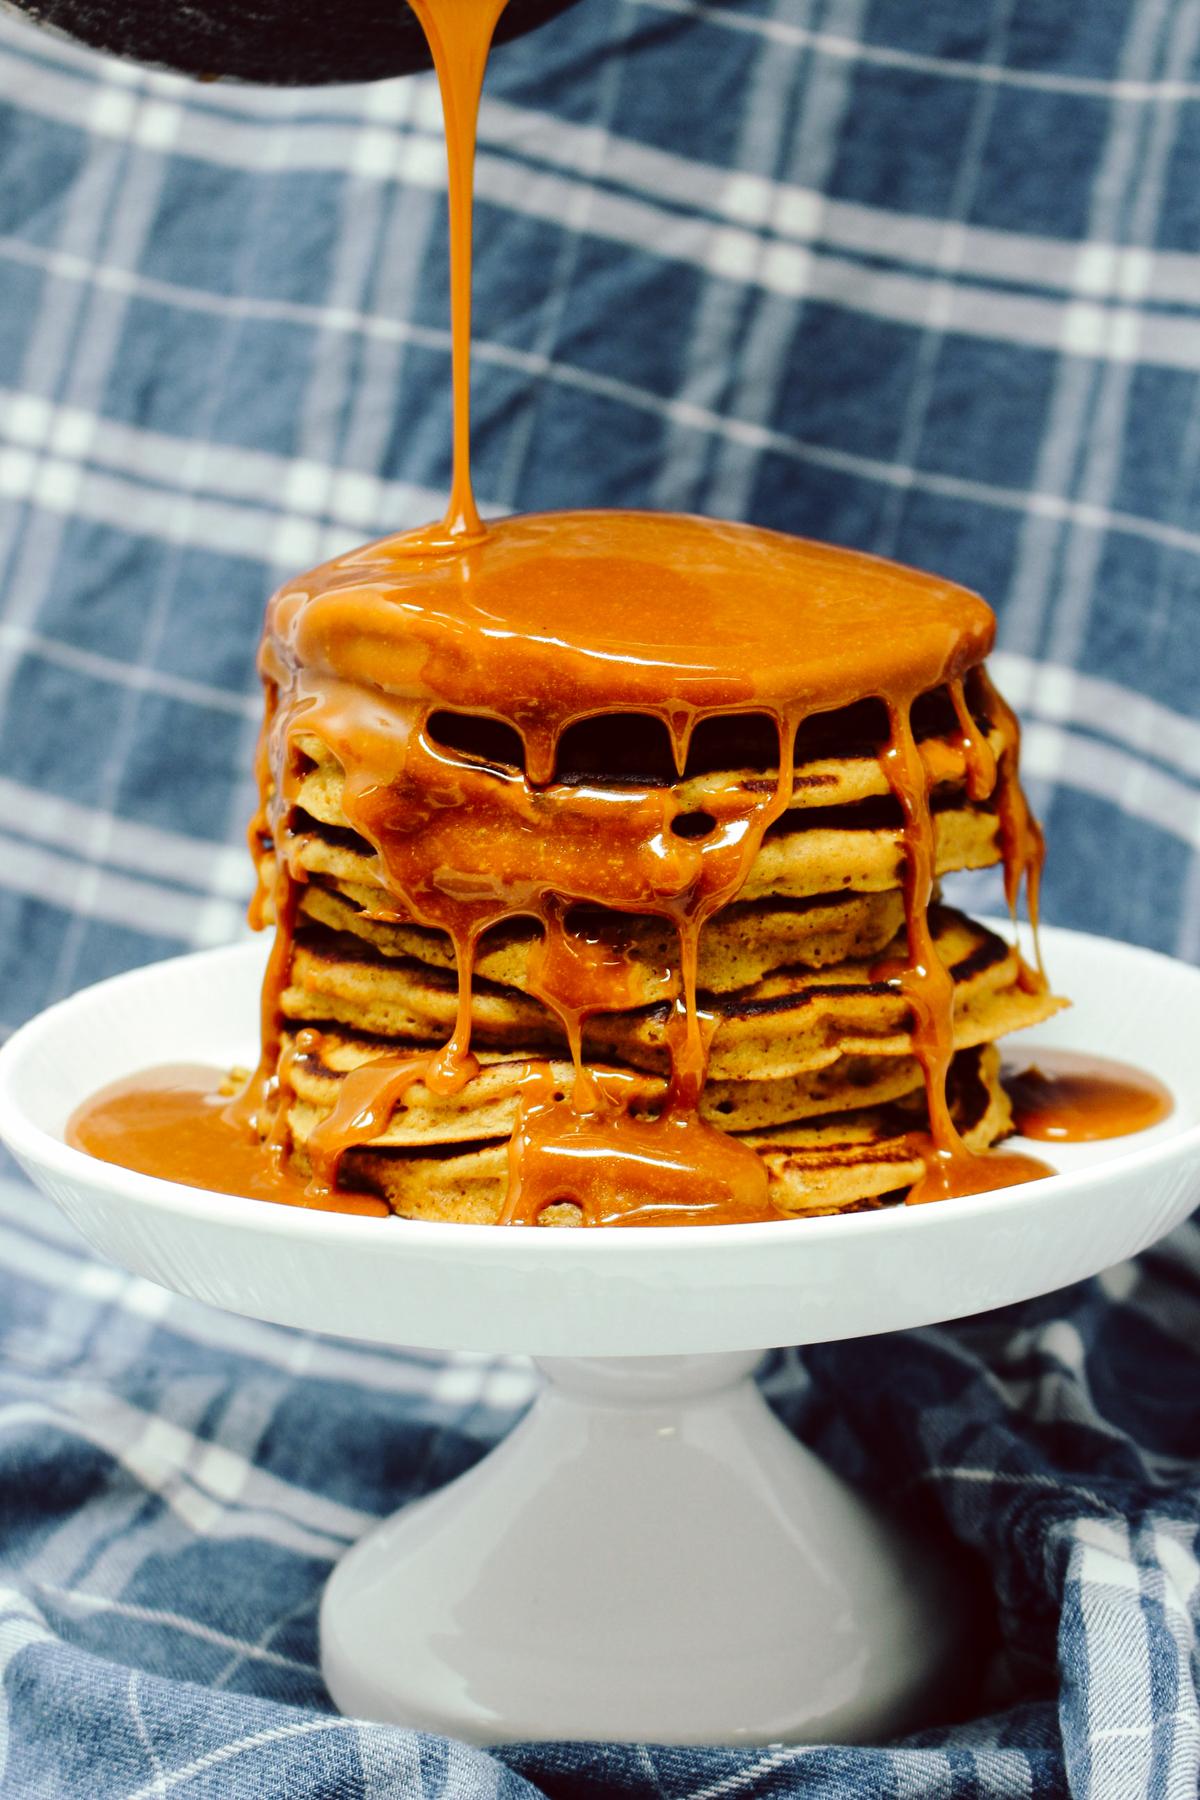 Sticky toffee pancakes. (Photo from "Pancakes Make People Happy," published by Hatherleigh Press)